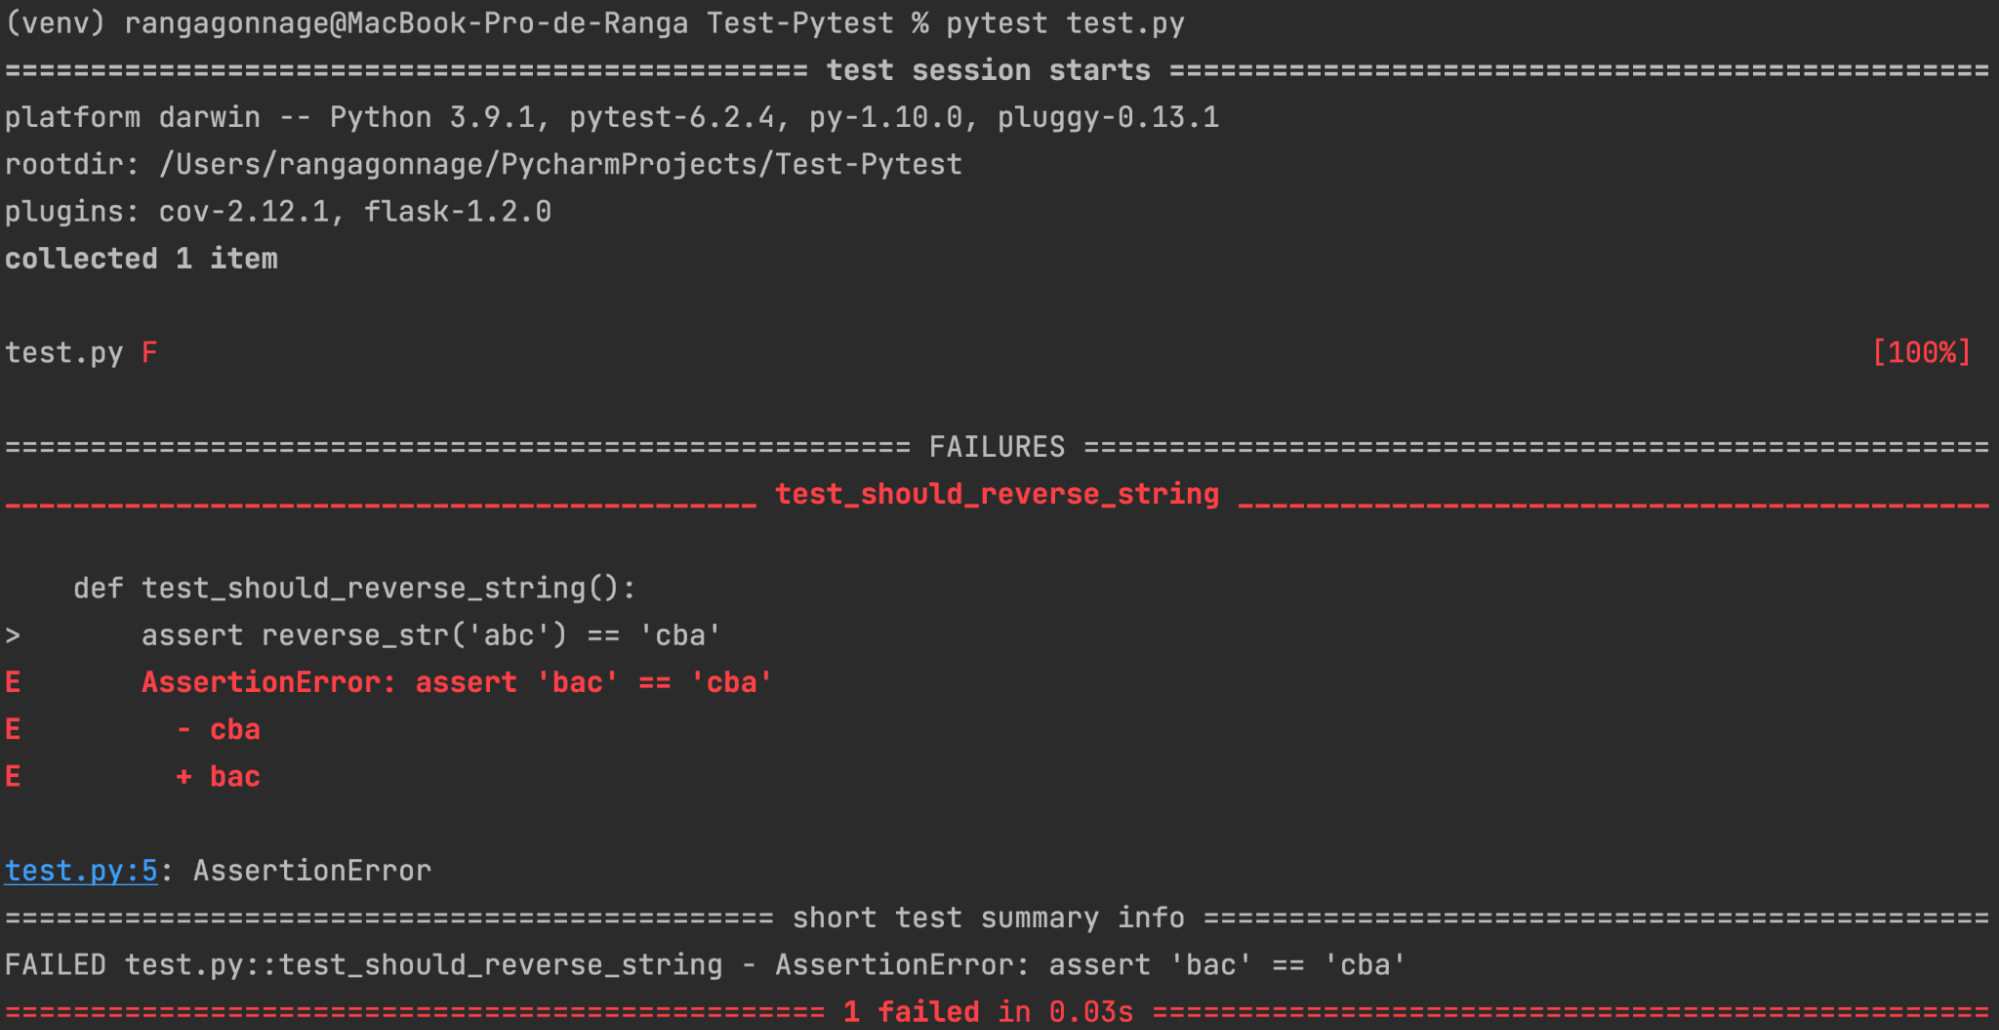 The test has failed and Pytest specifies the error in the terminal.